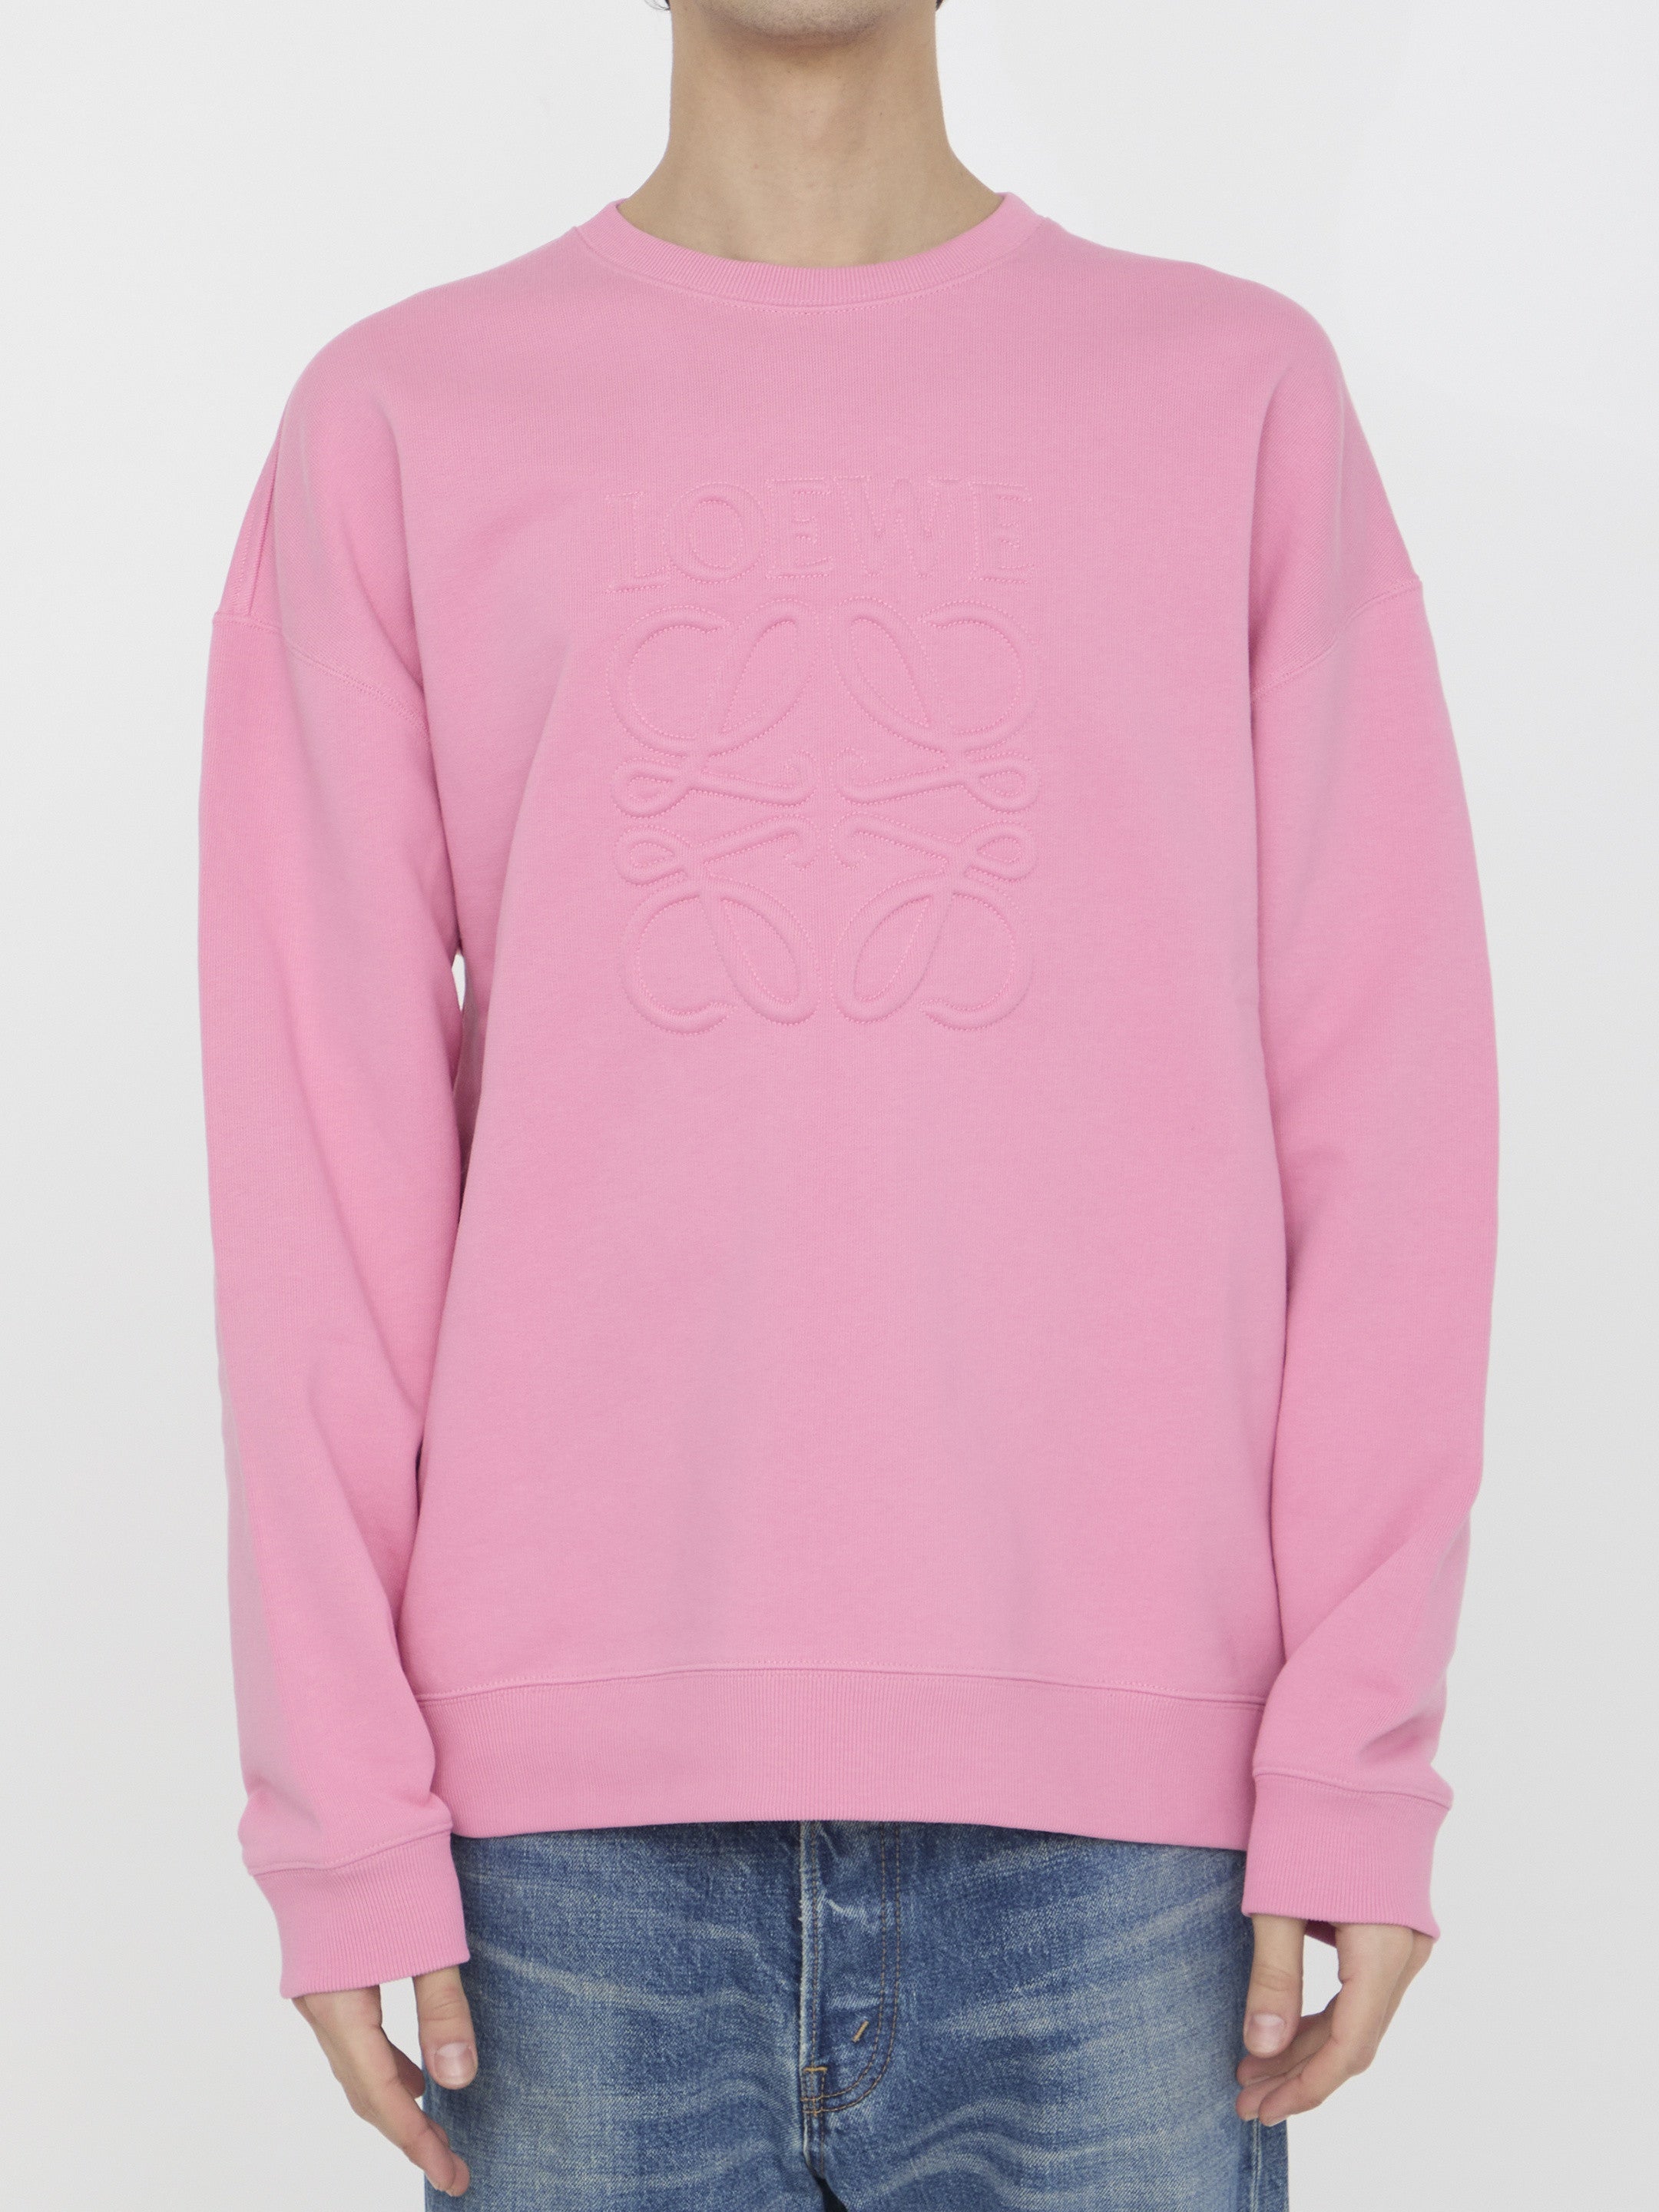 LOEWE-OUTLET-SALE-Cotton-sweatshirt-Strick-S-PINK-ARCHIVE-COLLECTION.jpg